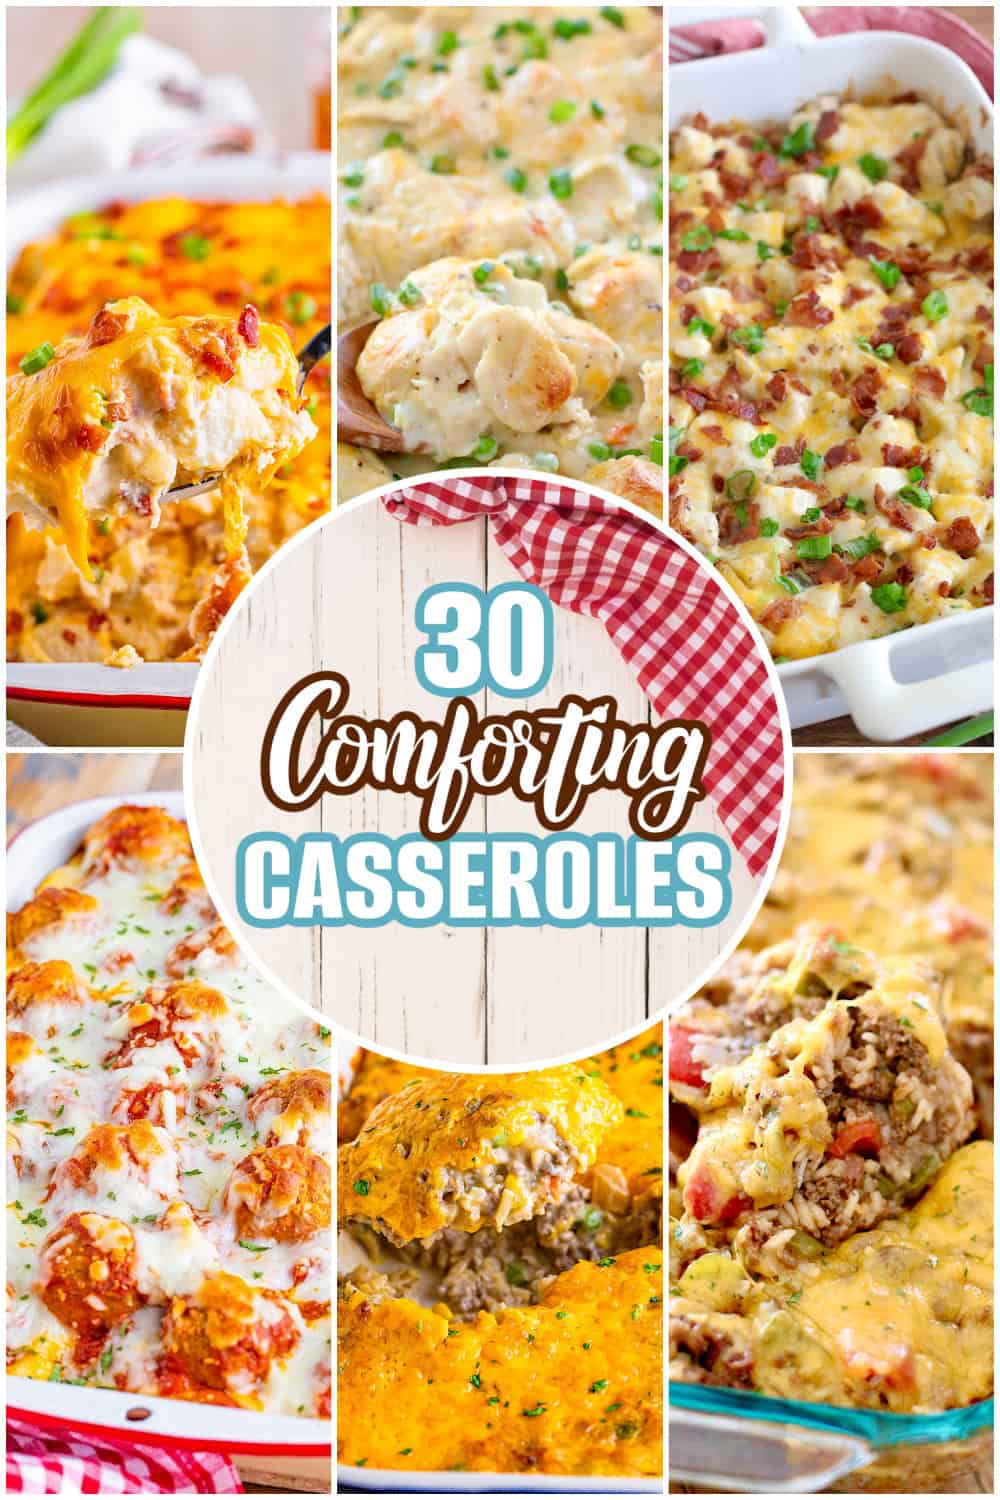 a collage of 6 casserole photos with text on the collage that says "30 Comforting Casseroles".